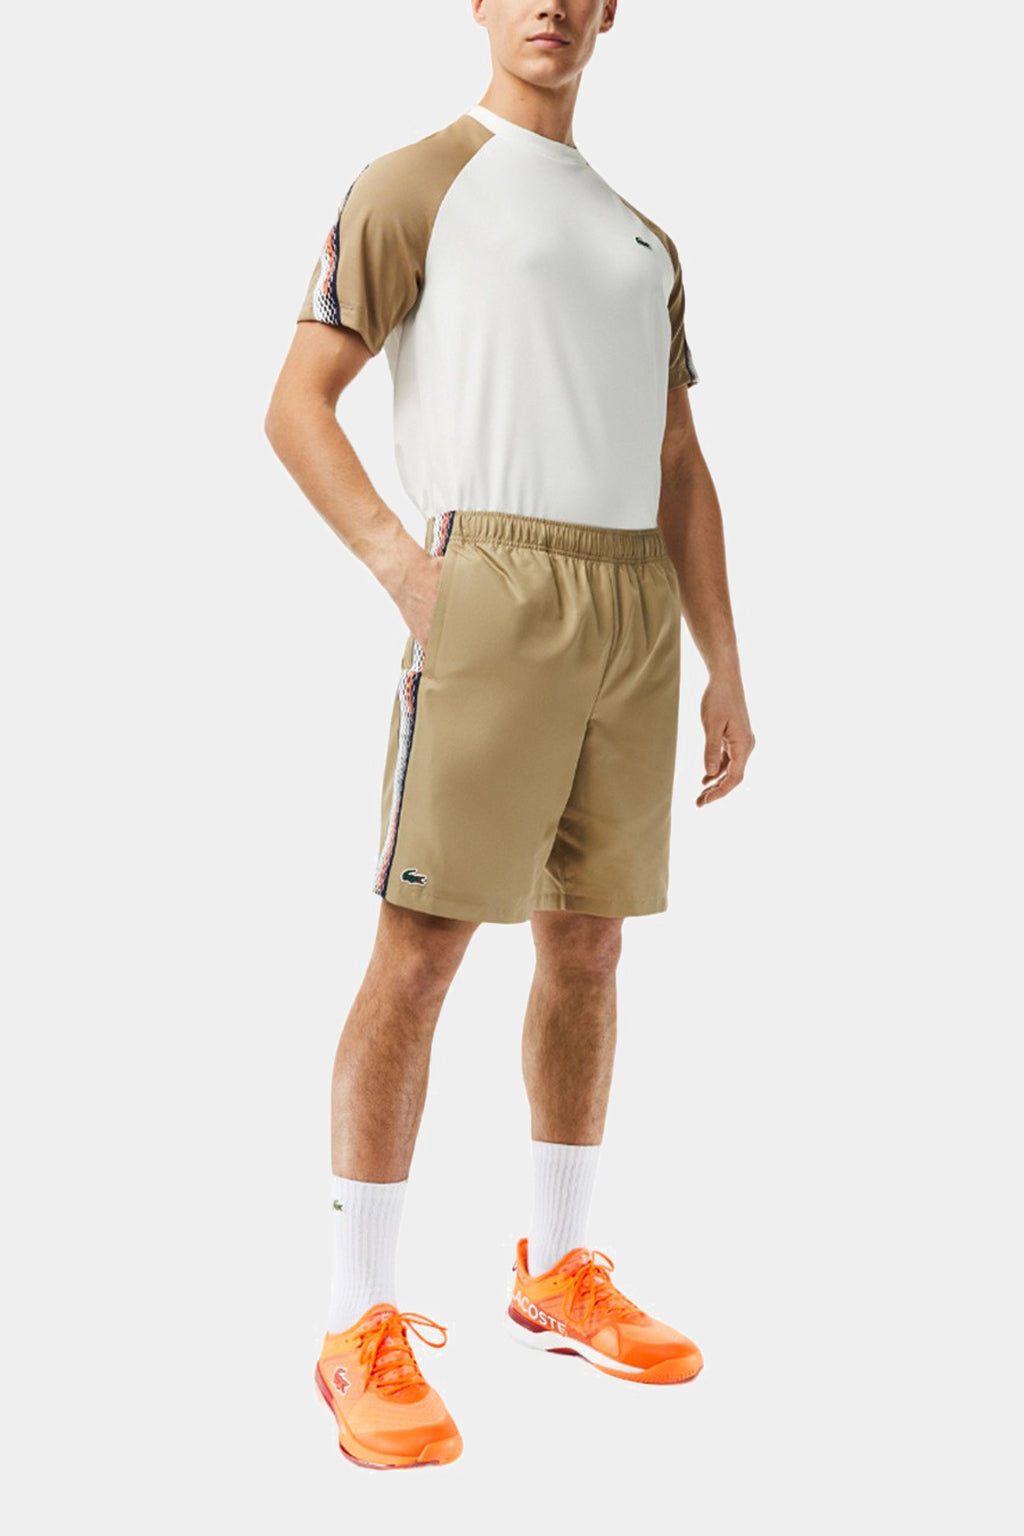 Lacoste - Men’s Lacoste Recycled Polyester Tennis Shorts